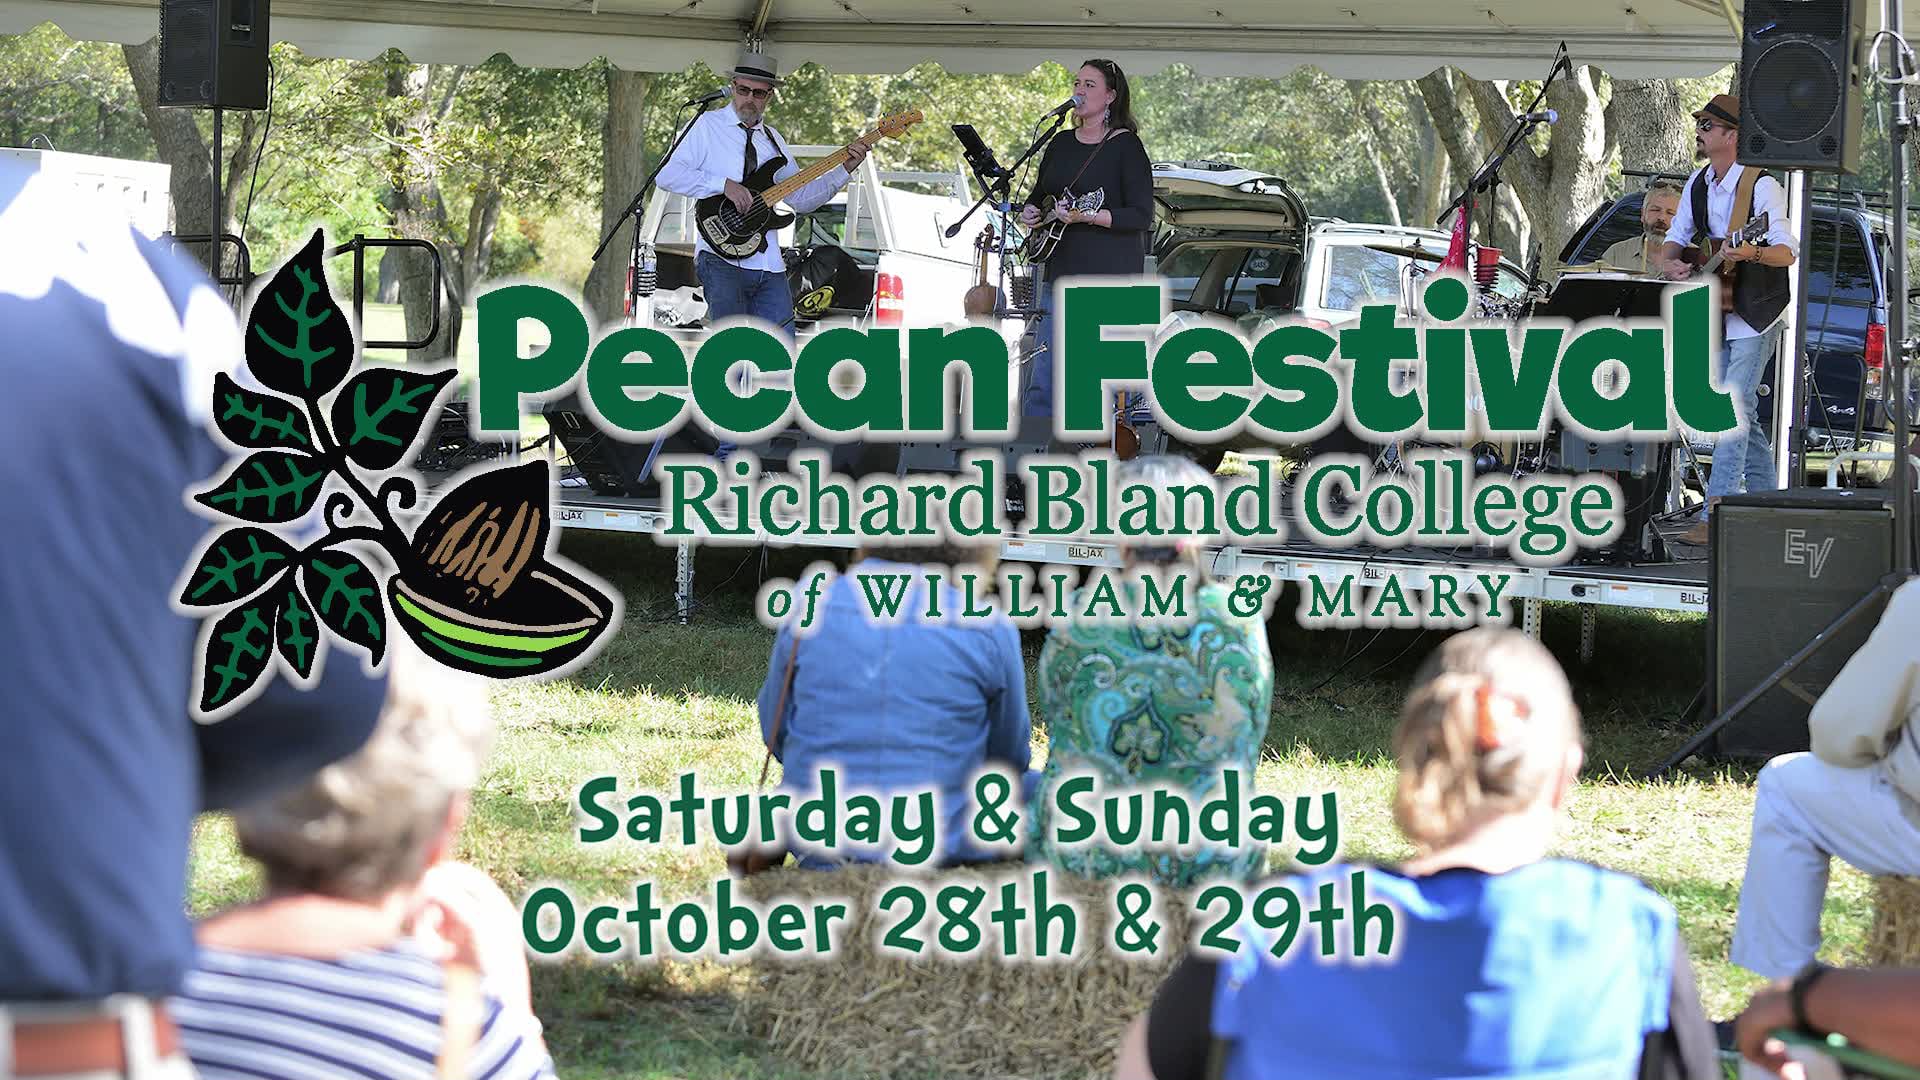 2017 Pecan Festival at Richard Bland College of William & Mary on Vimeo